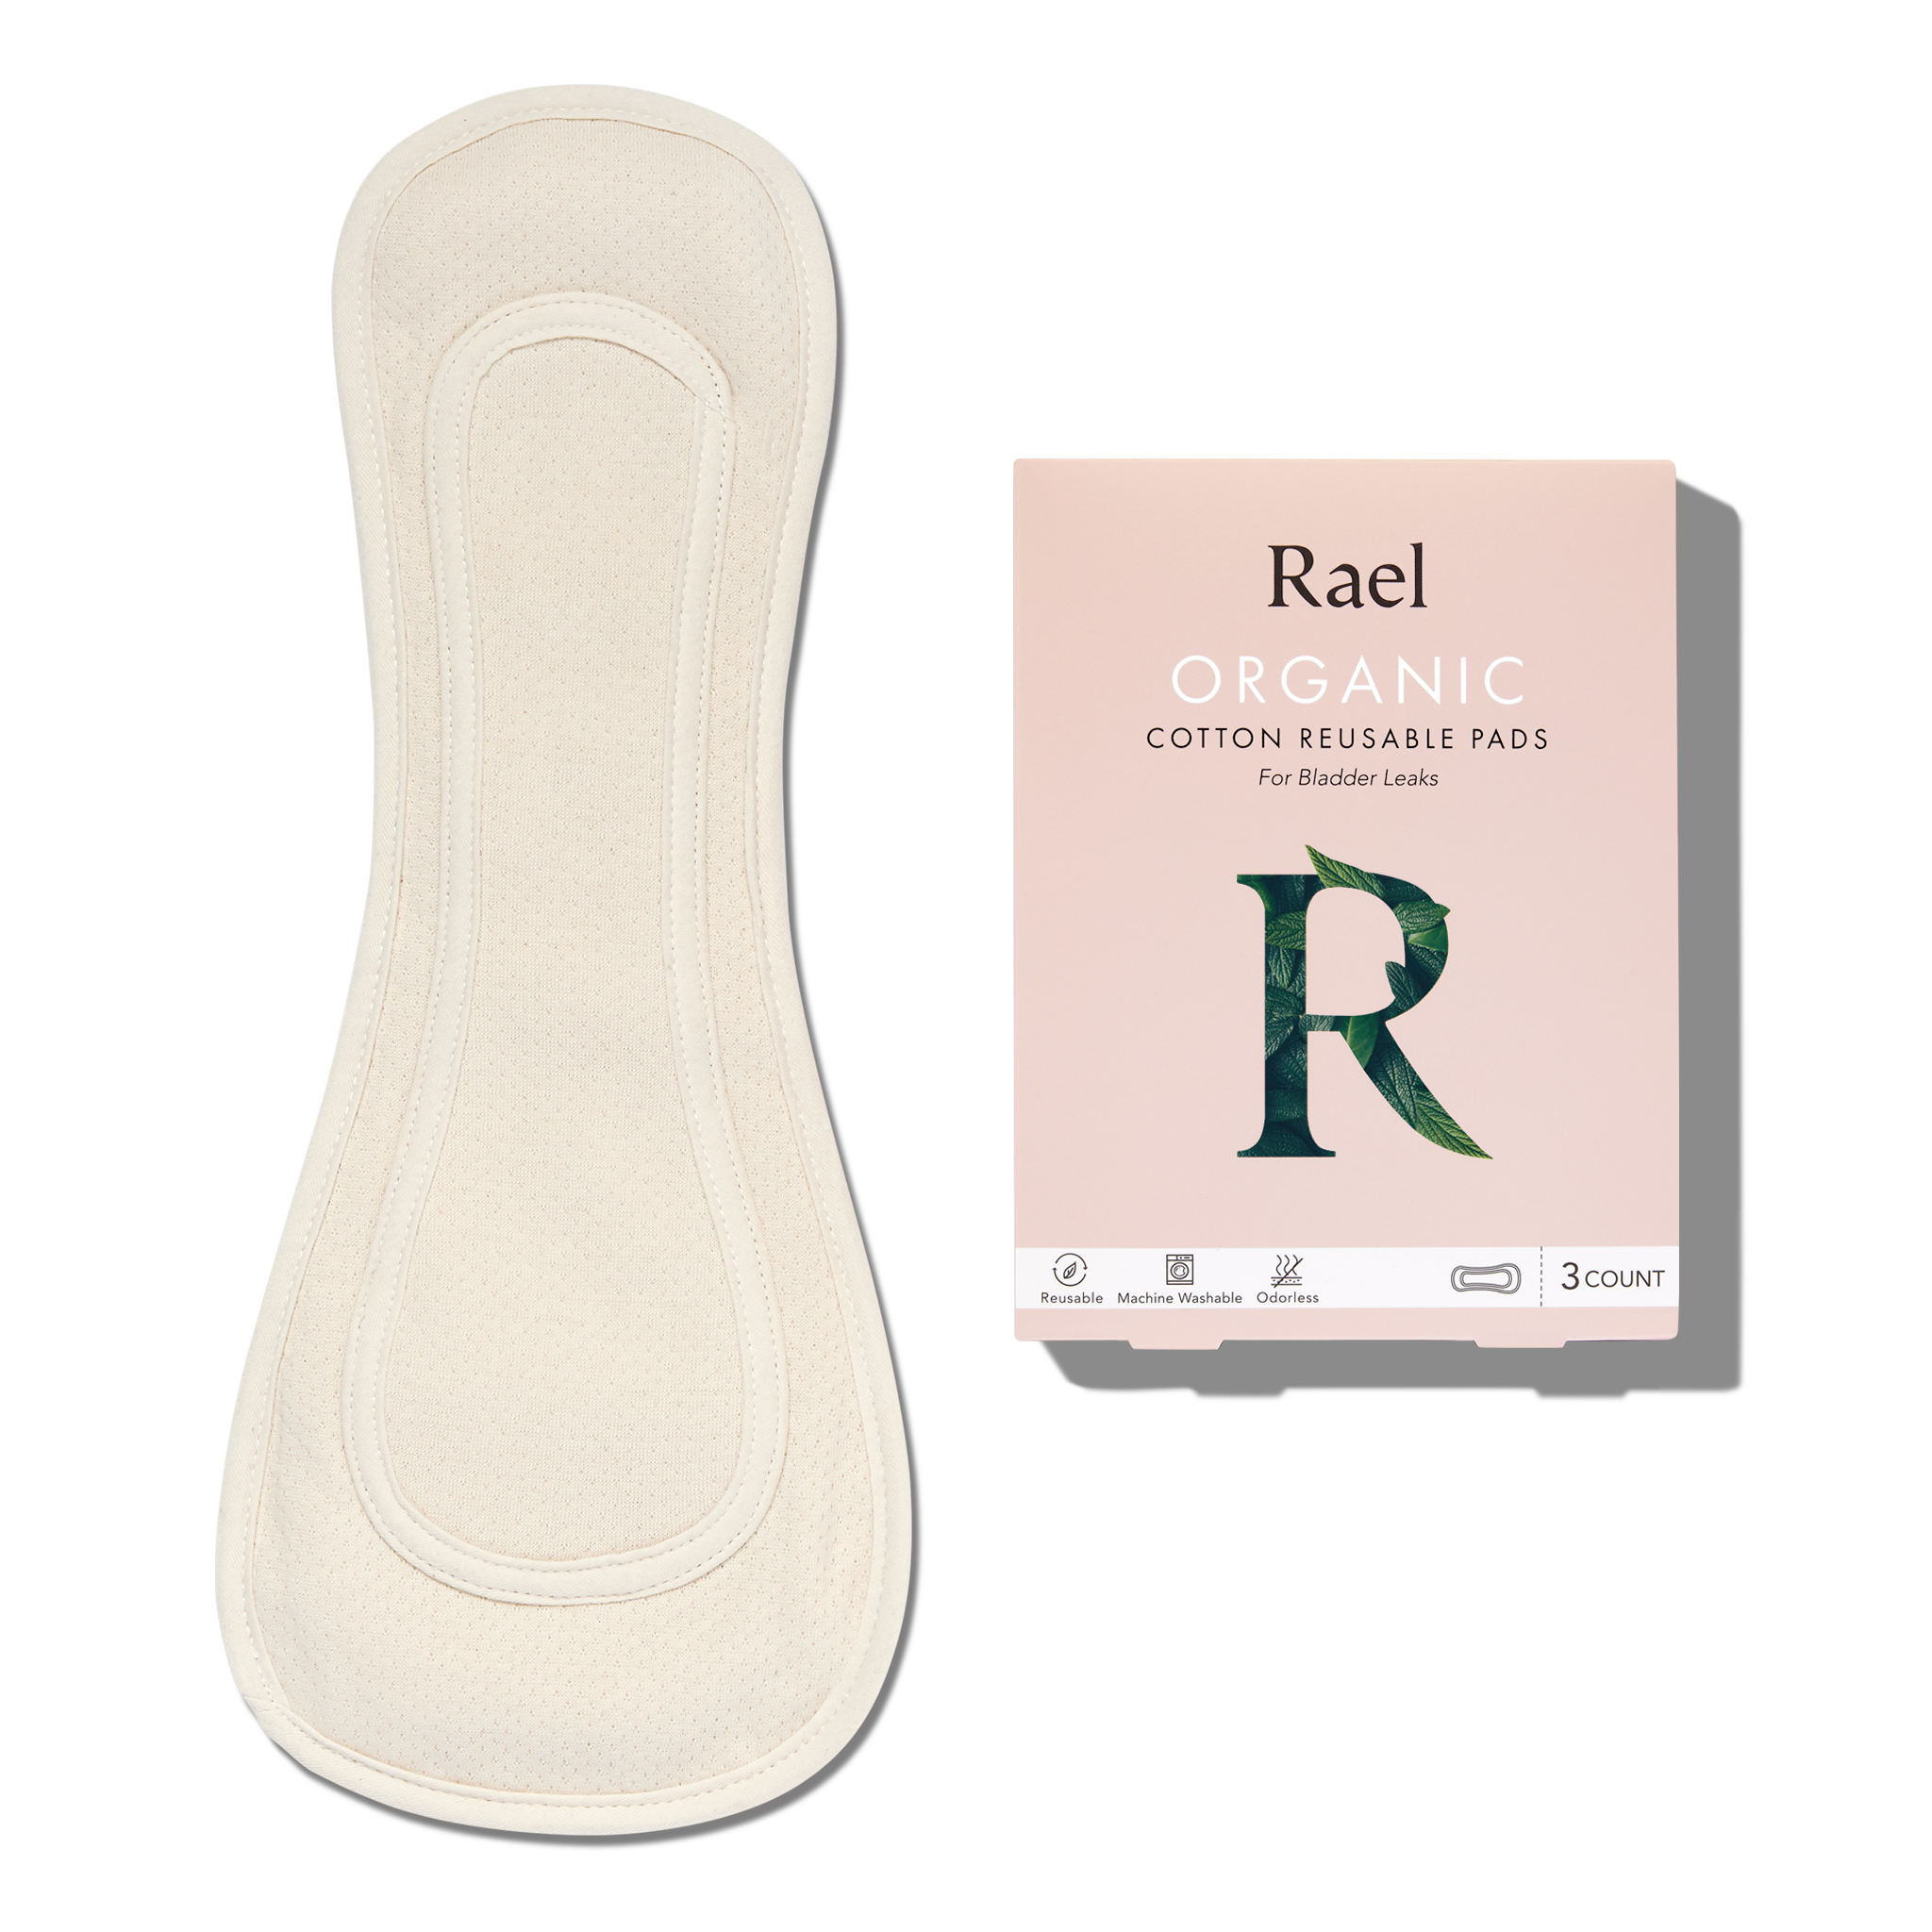 Organic Cotton Pads from Rael